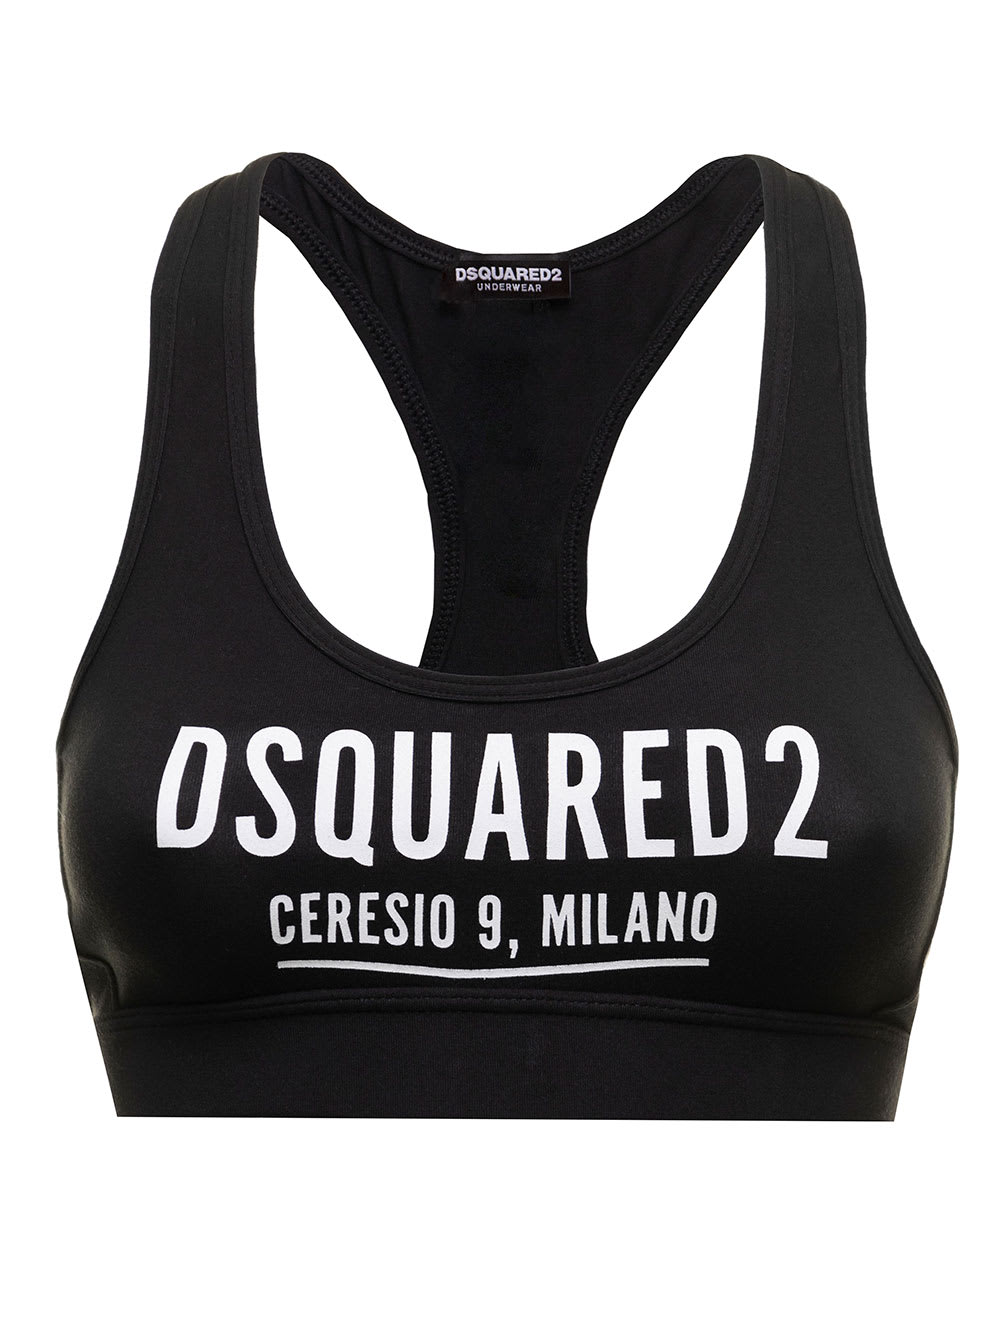 Dsquared2 D-squaured2 Woman s Black Stretch Cotton Top With Logo Print